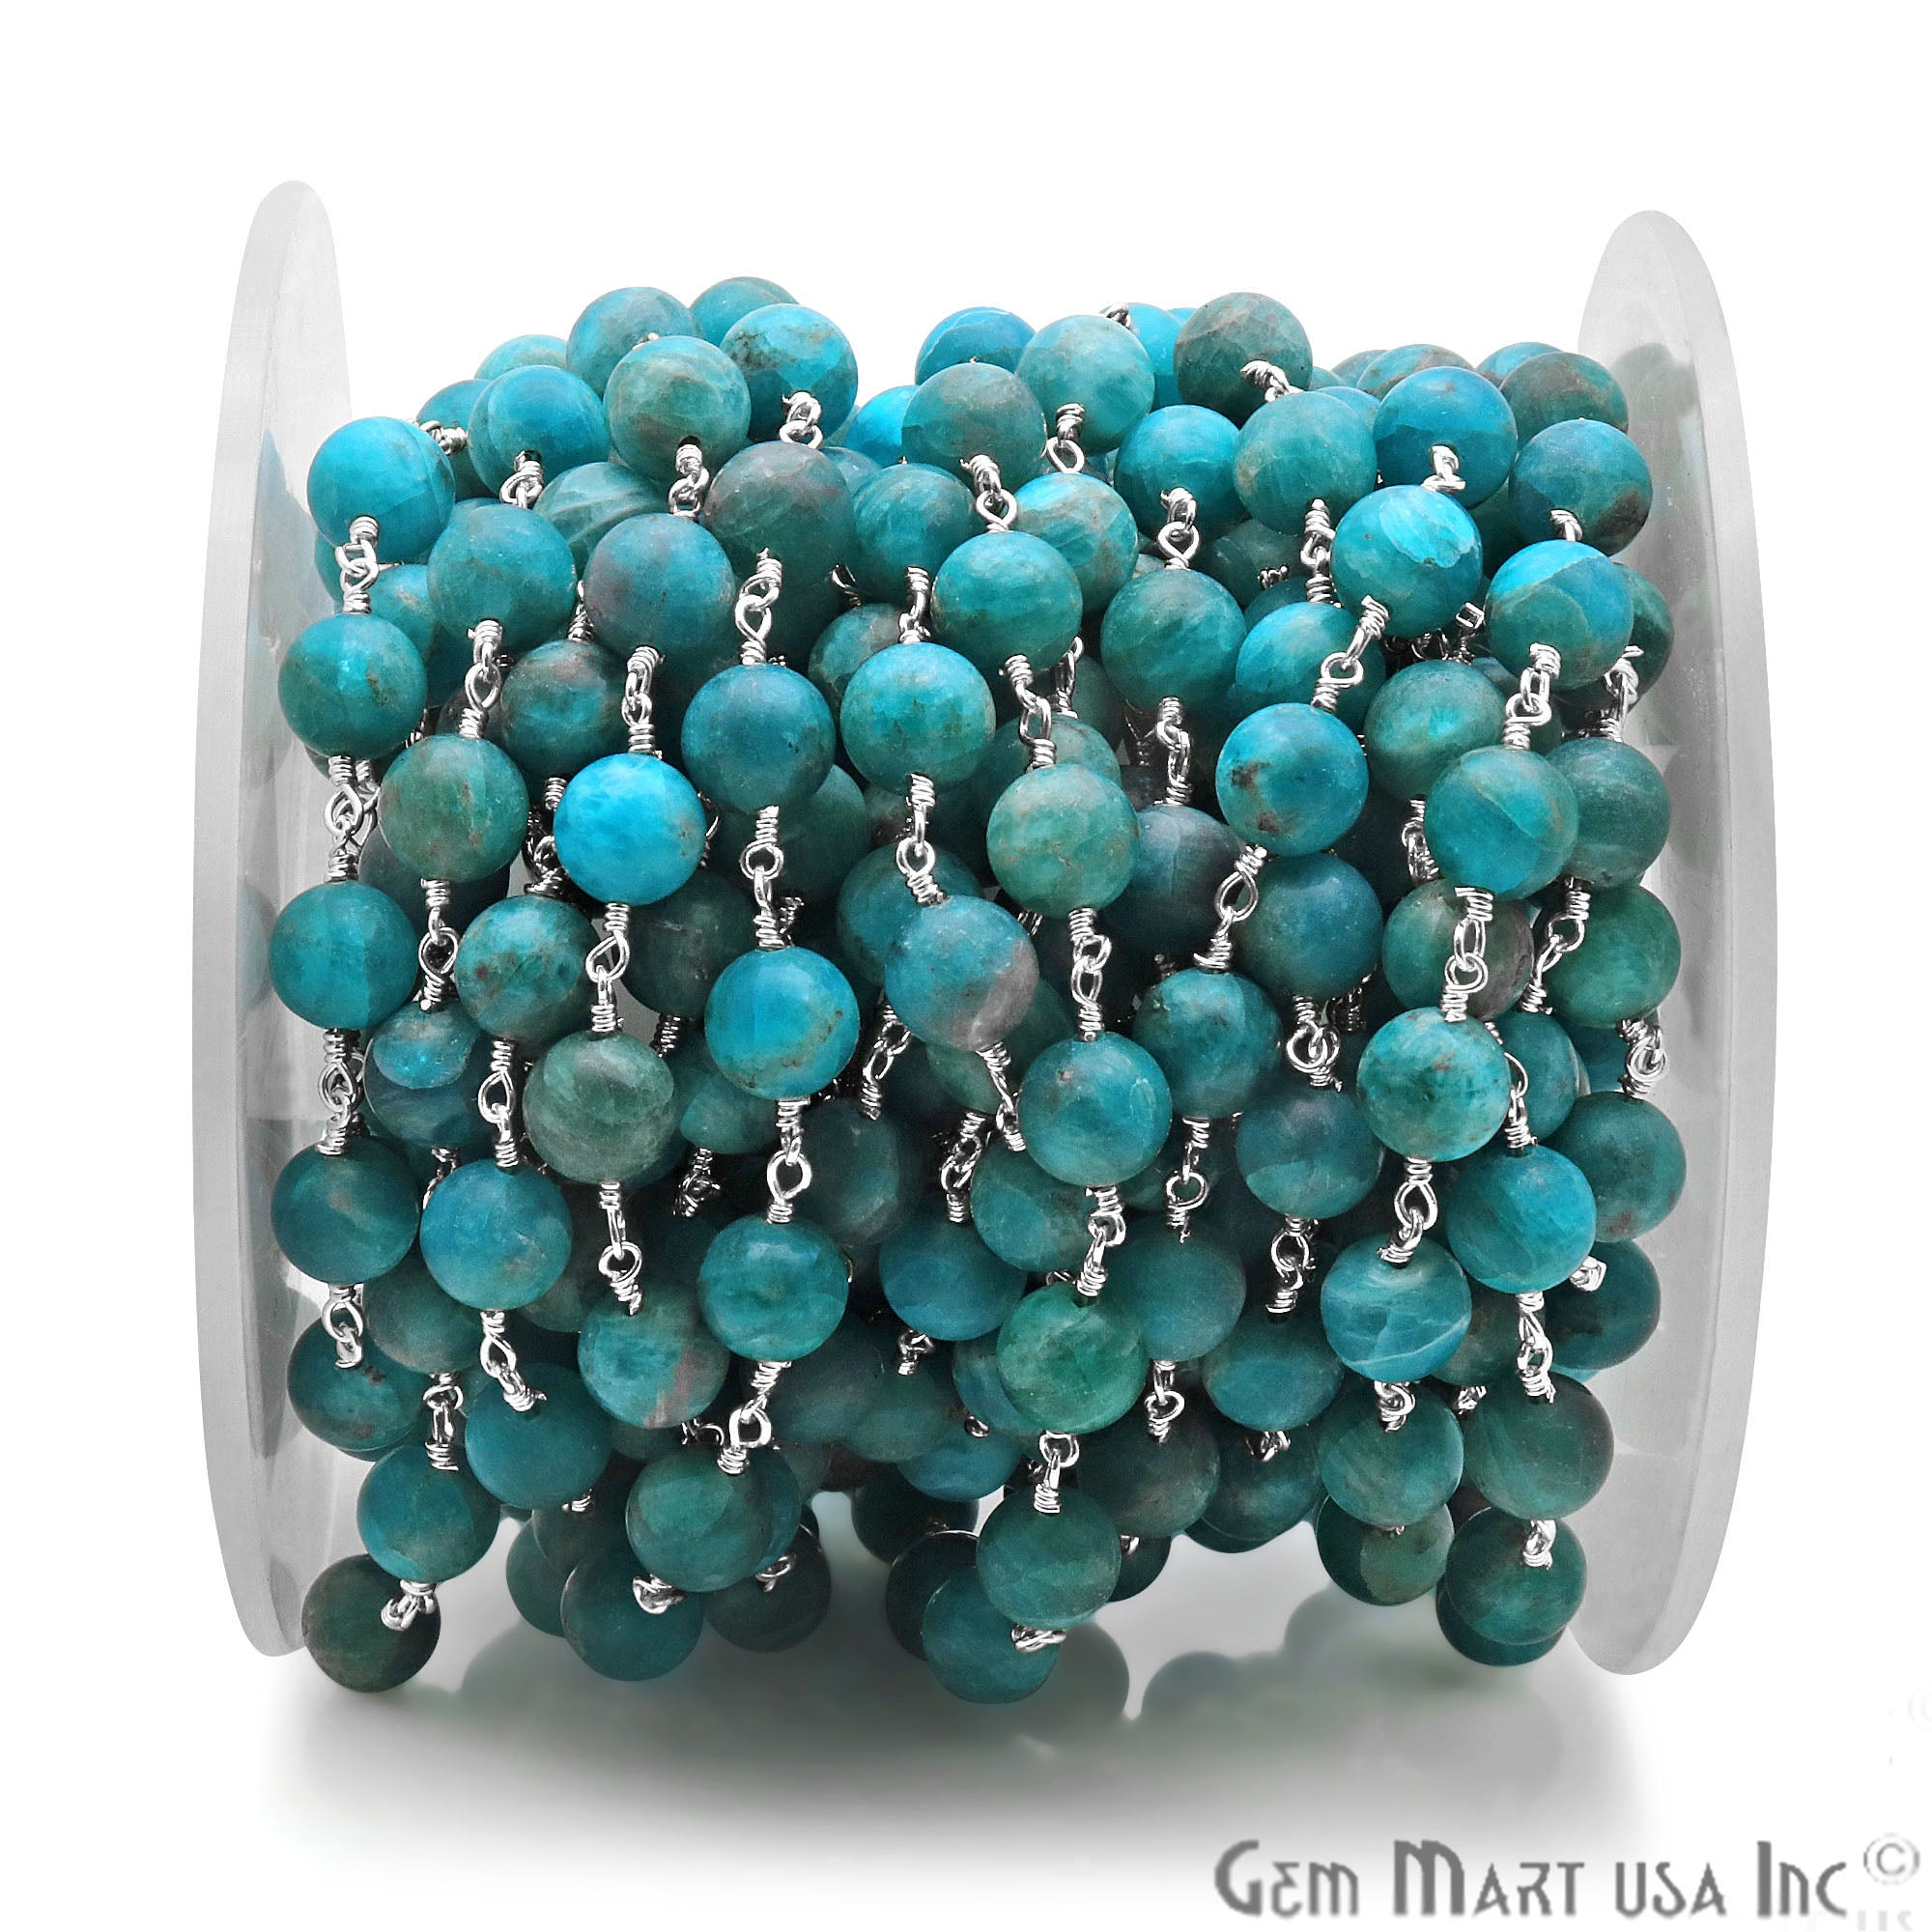 Neon Apatite Smooth Beads 8mm Silver Plated Wire Wrapped Gemstone Rosary Chain - GemMartUSA